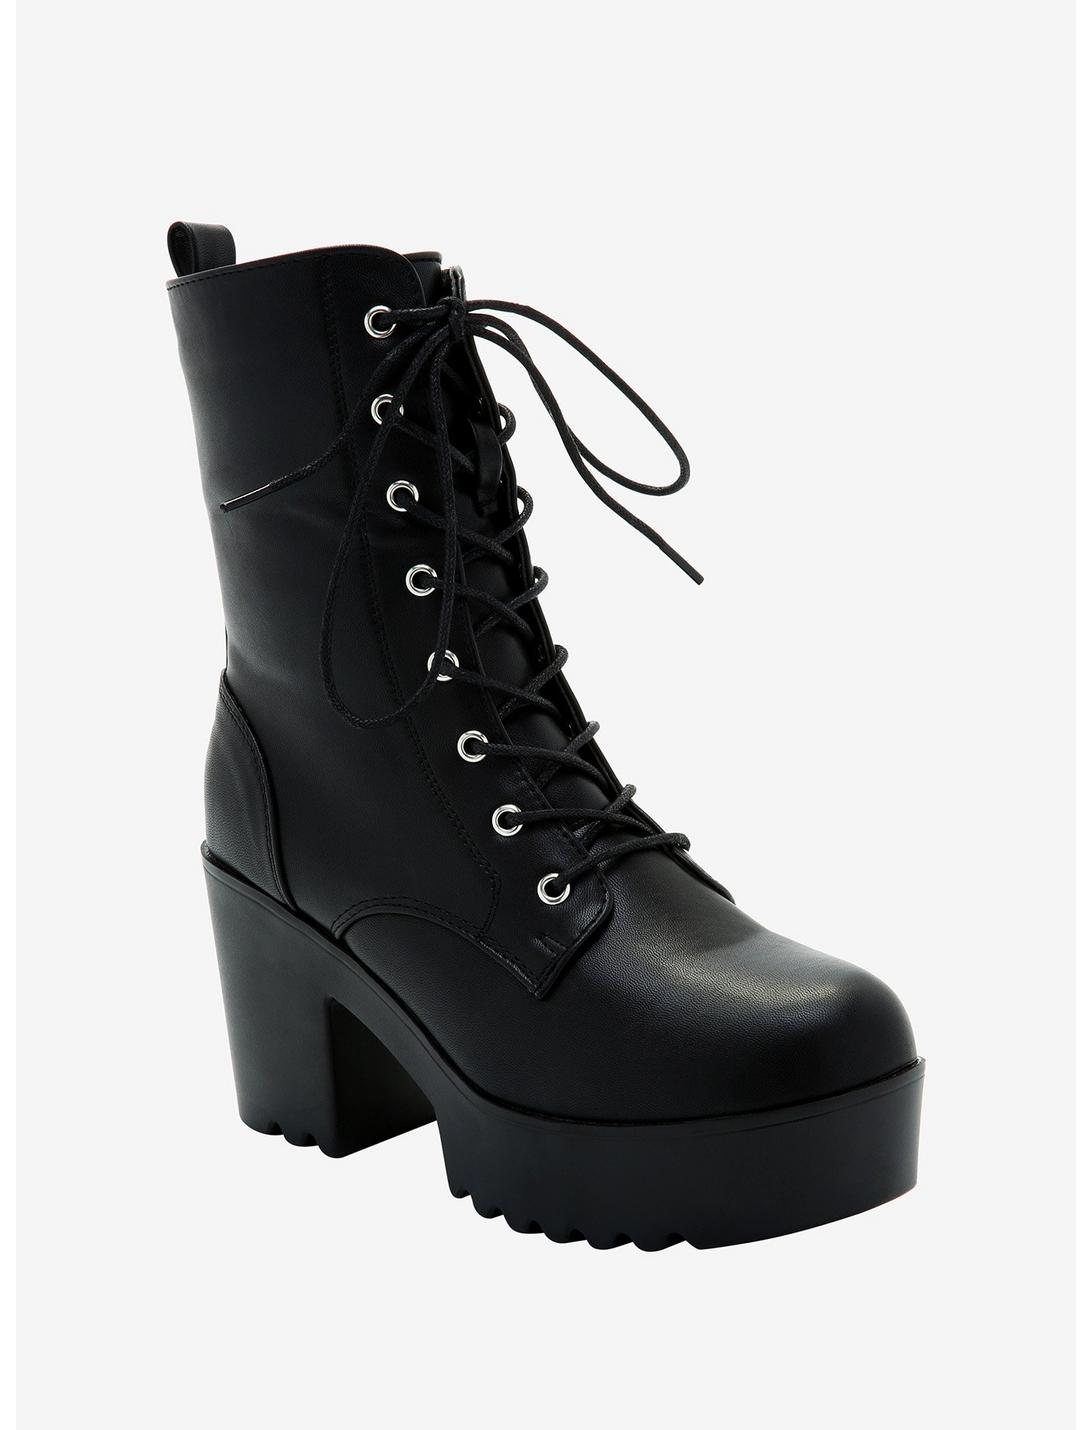 Black Lace Heeled Boots, MULTI, hi-res